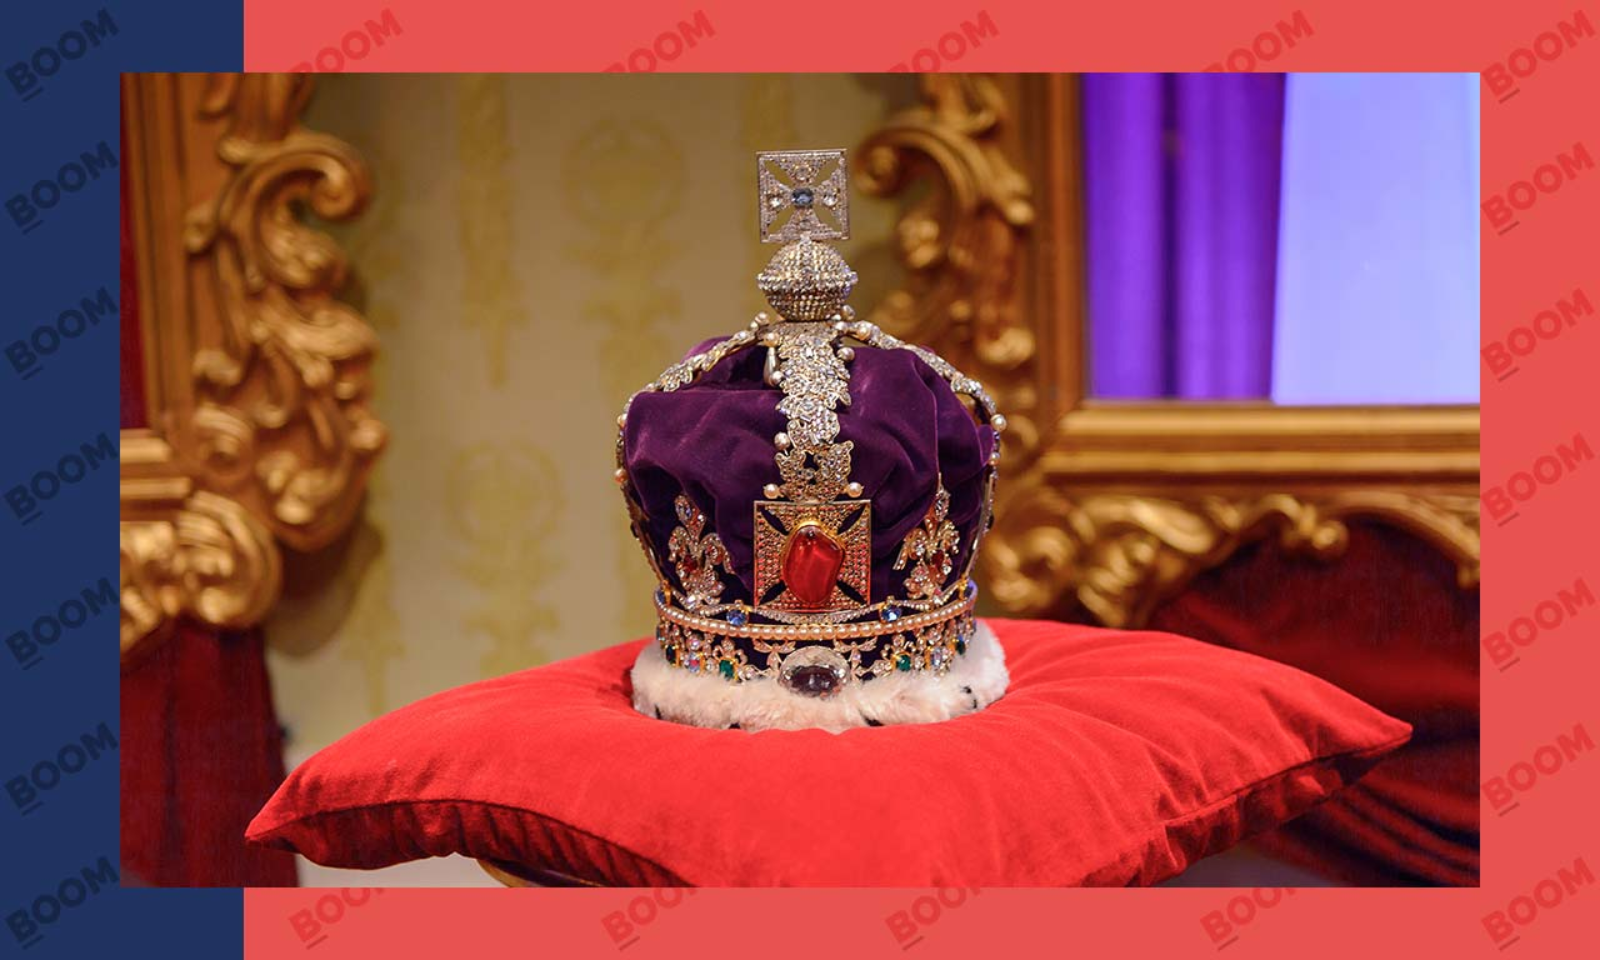 What the Koh-i-noor Really Represents